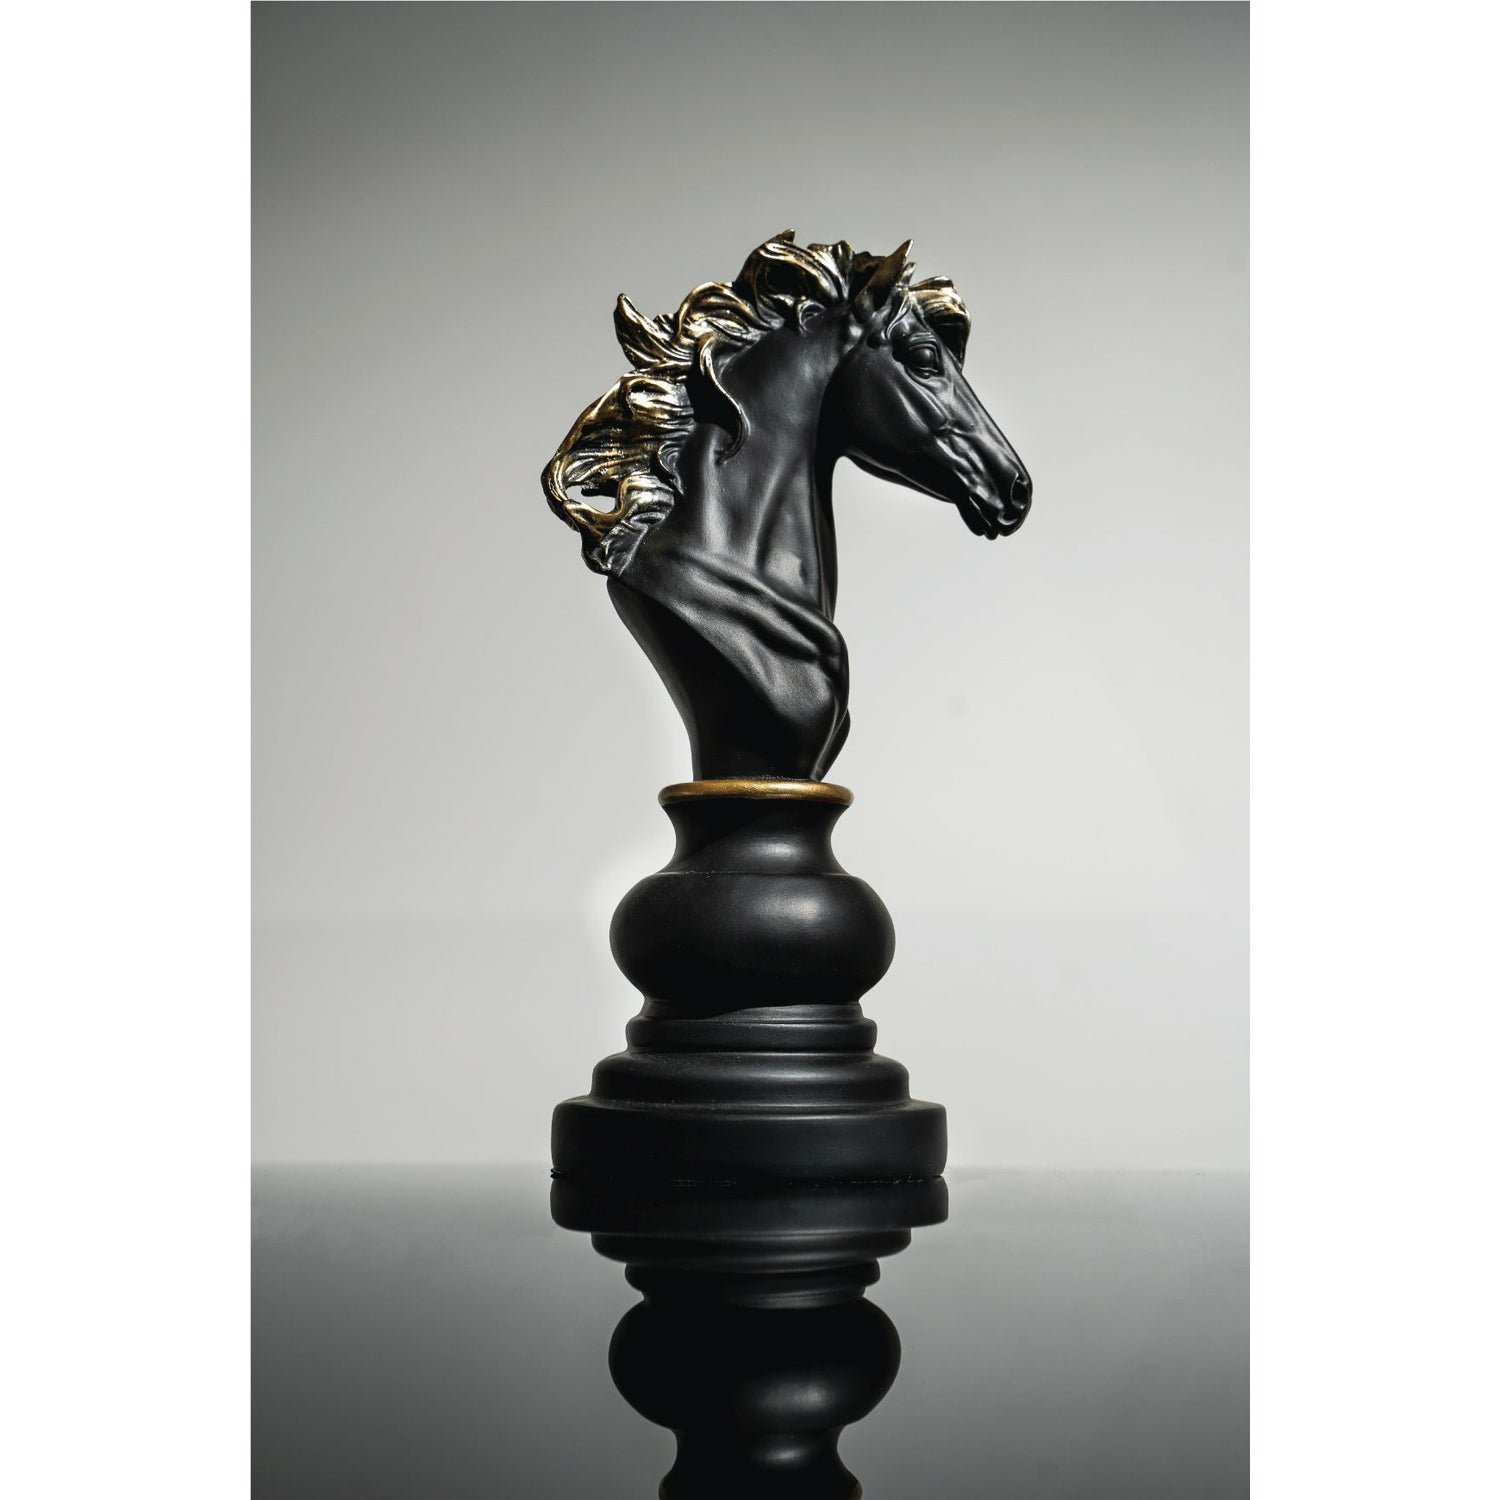 Black & Gold Horse Chess Piece - Our Black & Gold Chess Pieces are the perfect addition to any space. Made-to-order pieces are also available.